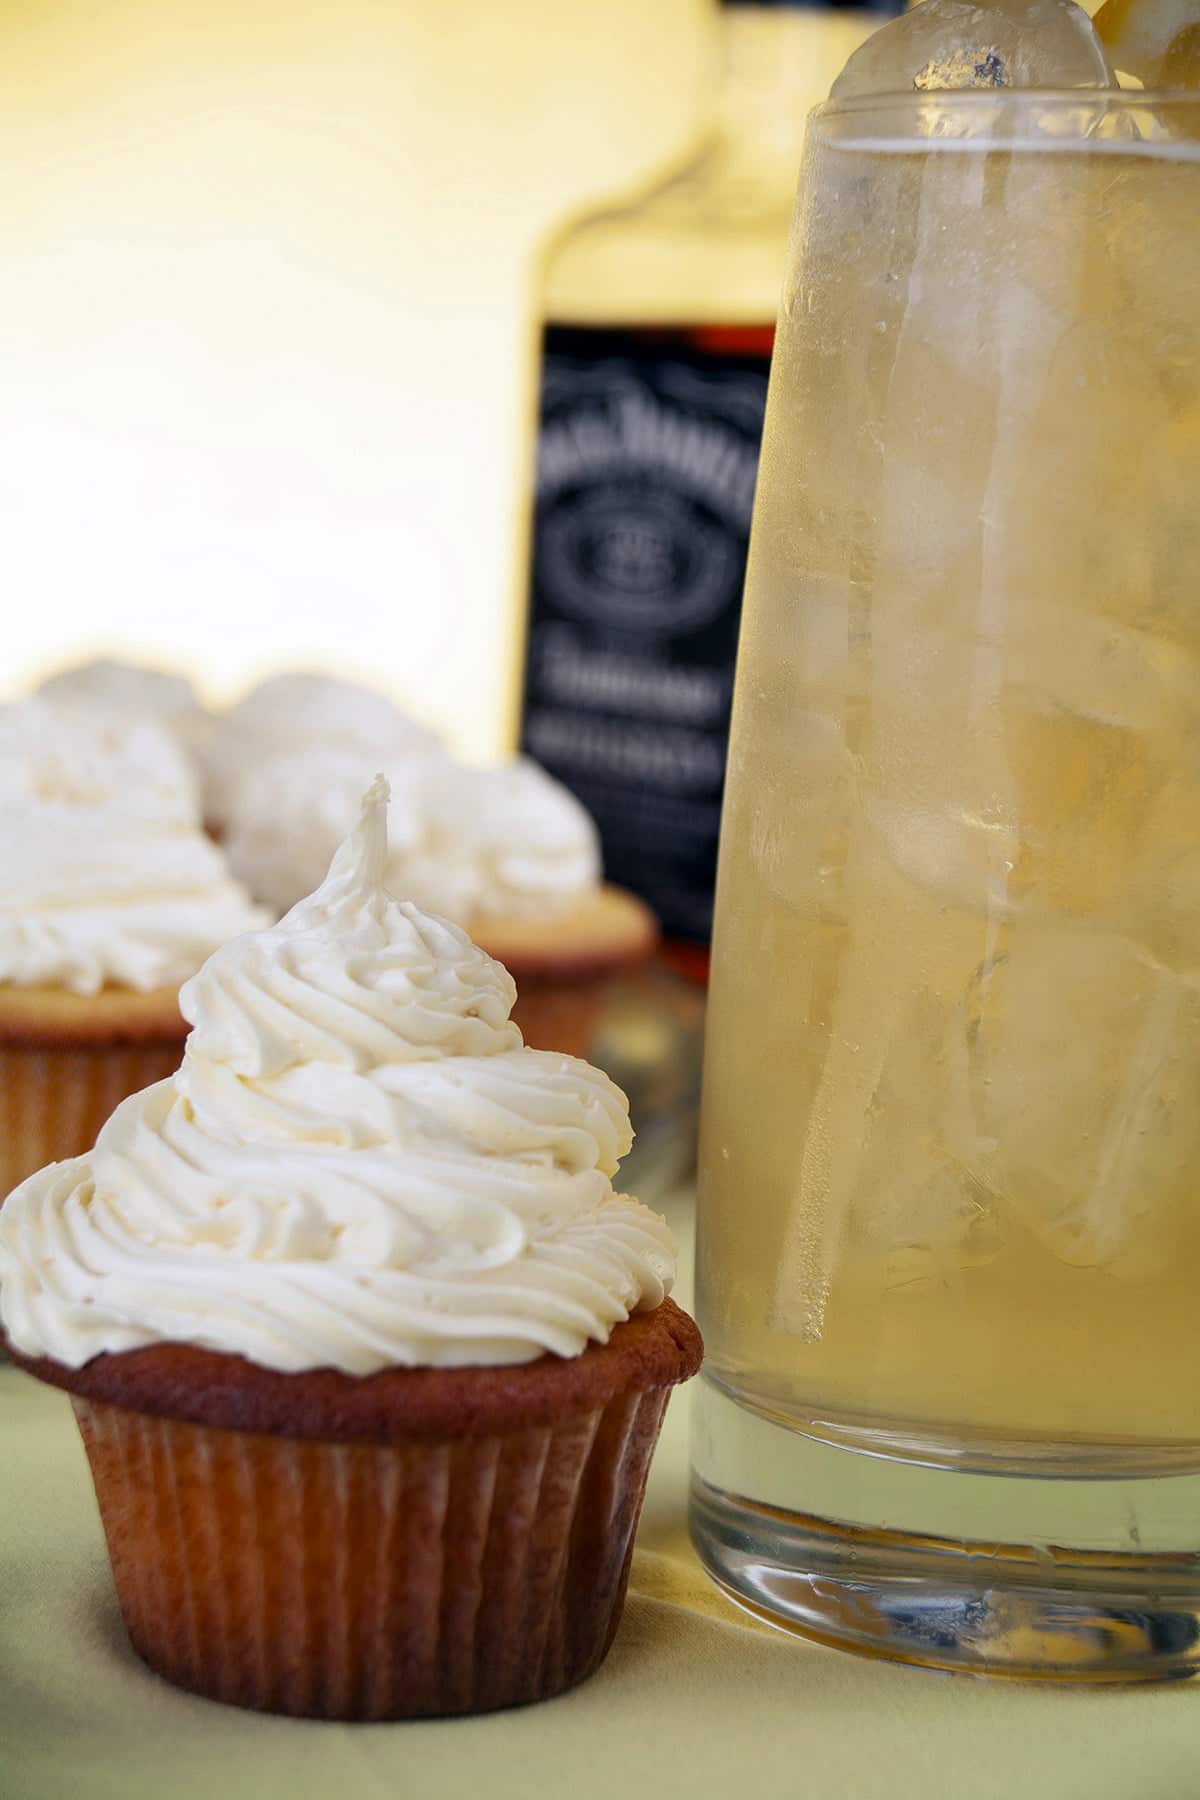 A tray of Lynchburg Lemonade Cupcakes is pictured with a bottle of Jack Daniels, a couple fresh lemons, and a glass of Lynchburg lemonade cocktail.